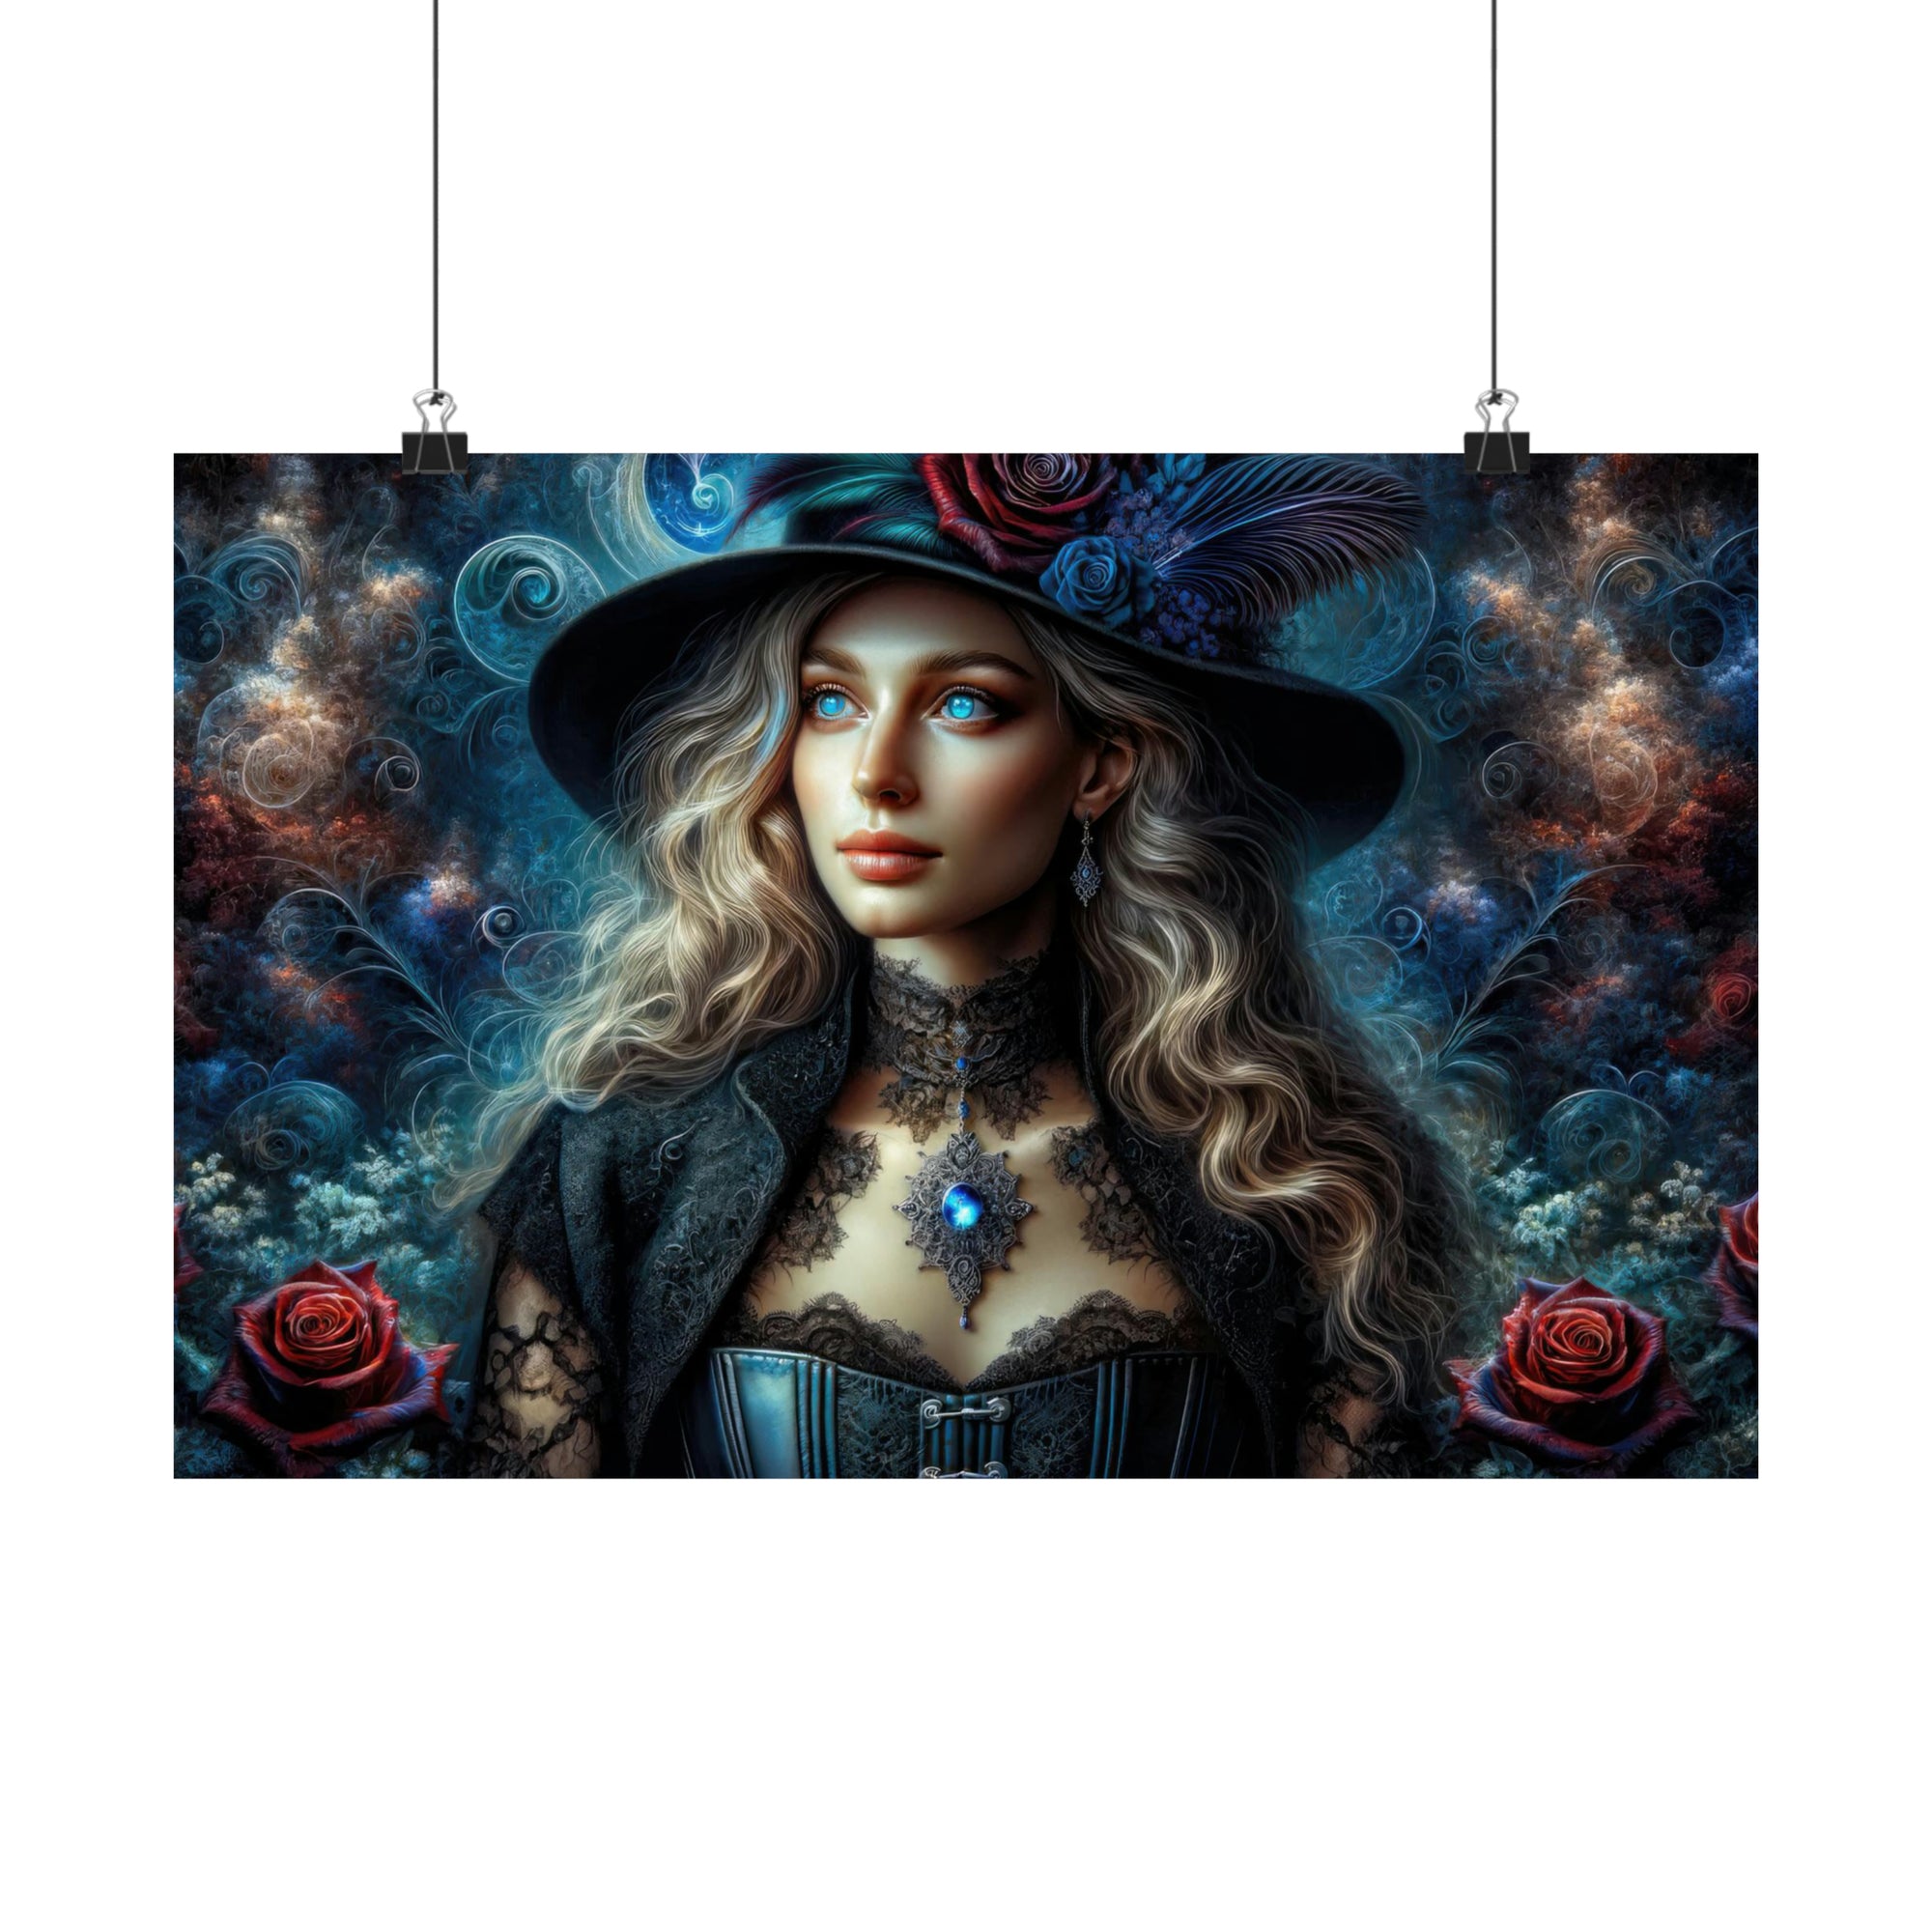 Dreams Woven in Moonlight and Roses Poster